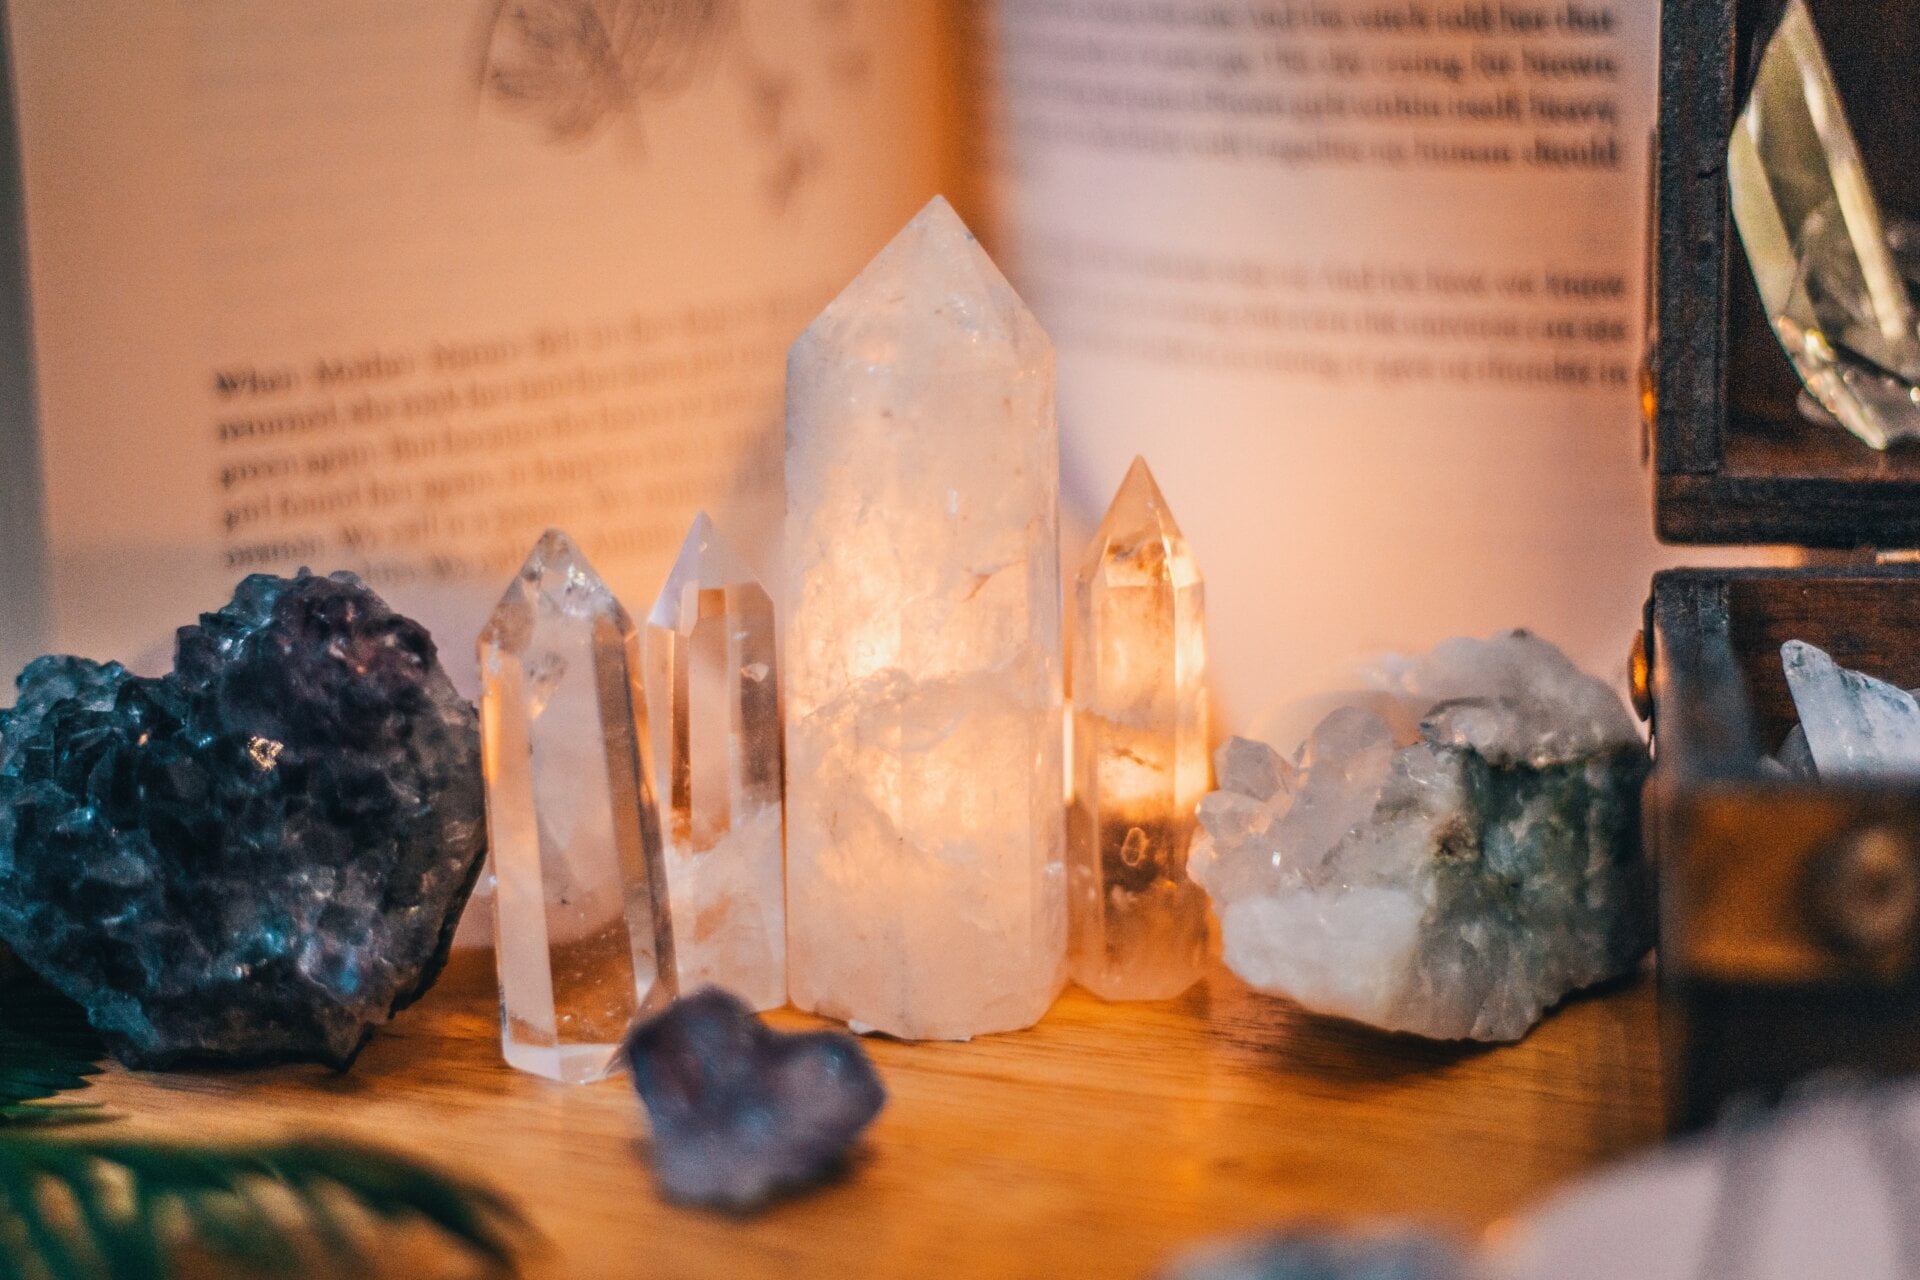 Psychic Readings by Crystal